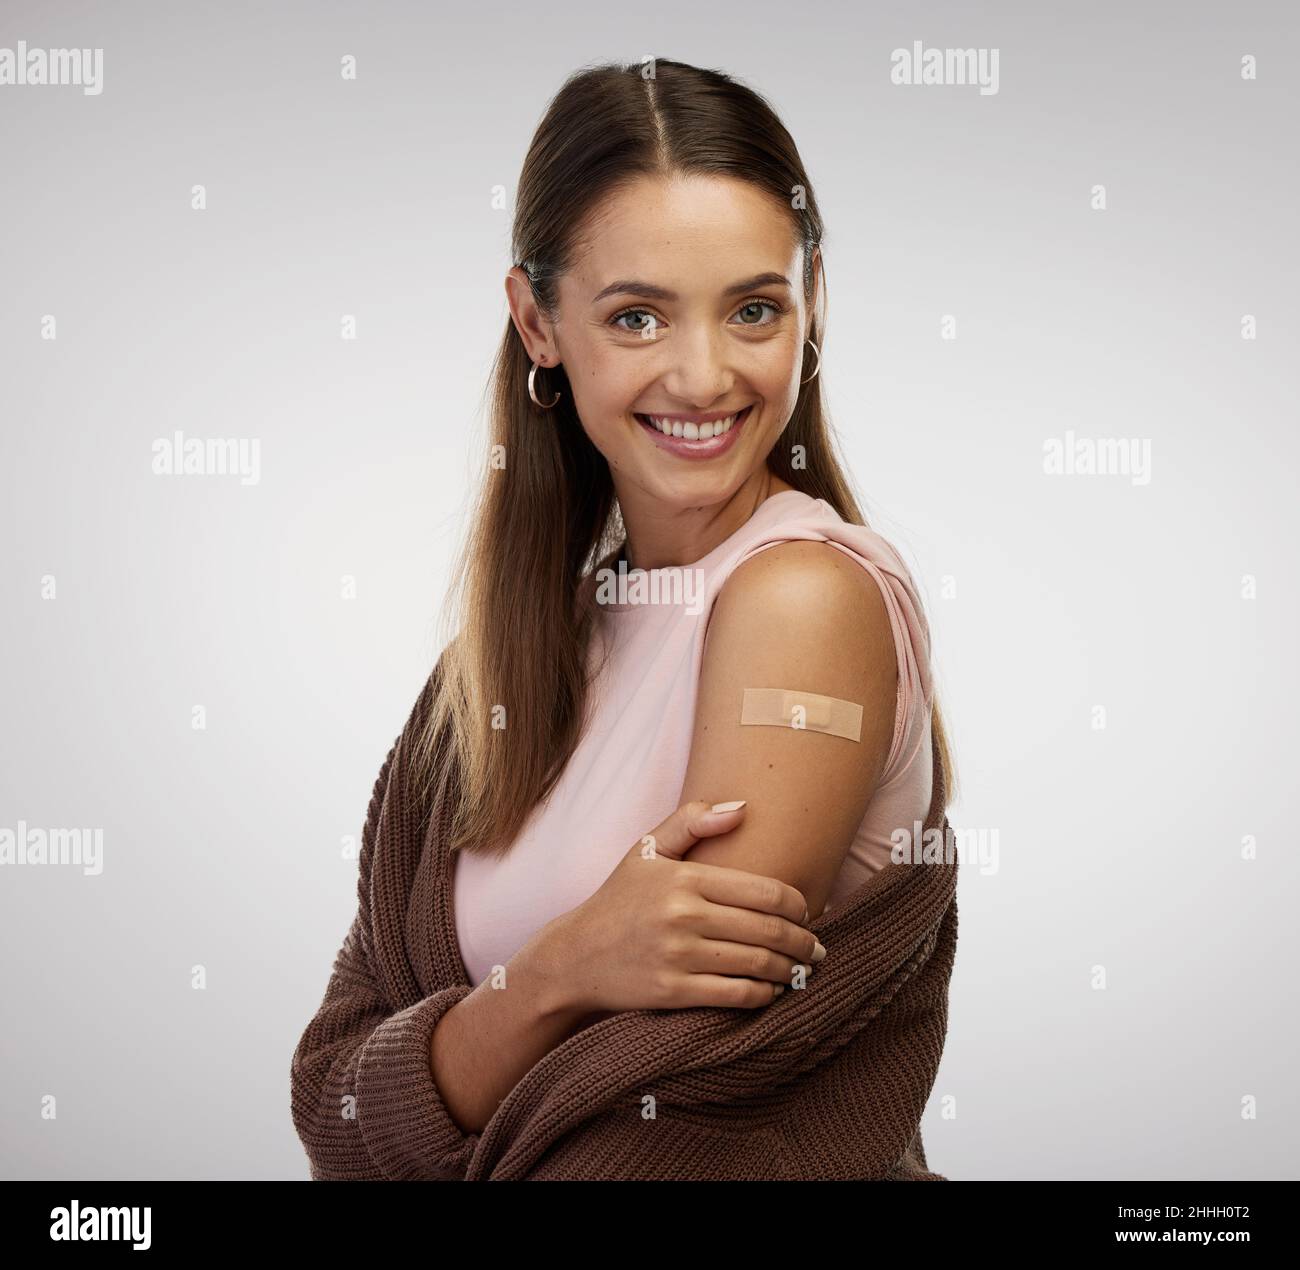 Vaccine shots tequila shots. Shot of a young woman standing alone in the studio after getting vaccinated. Stock Photo